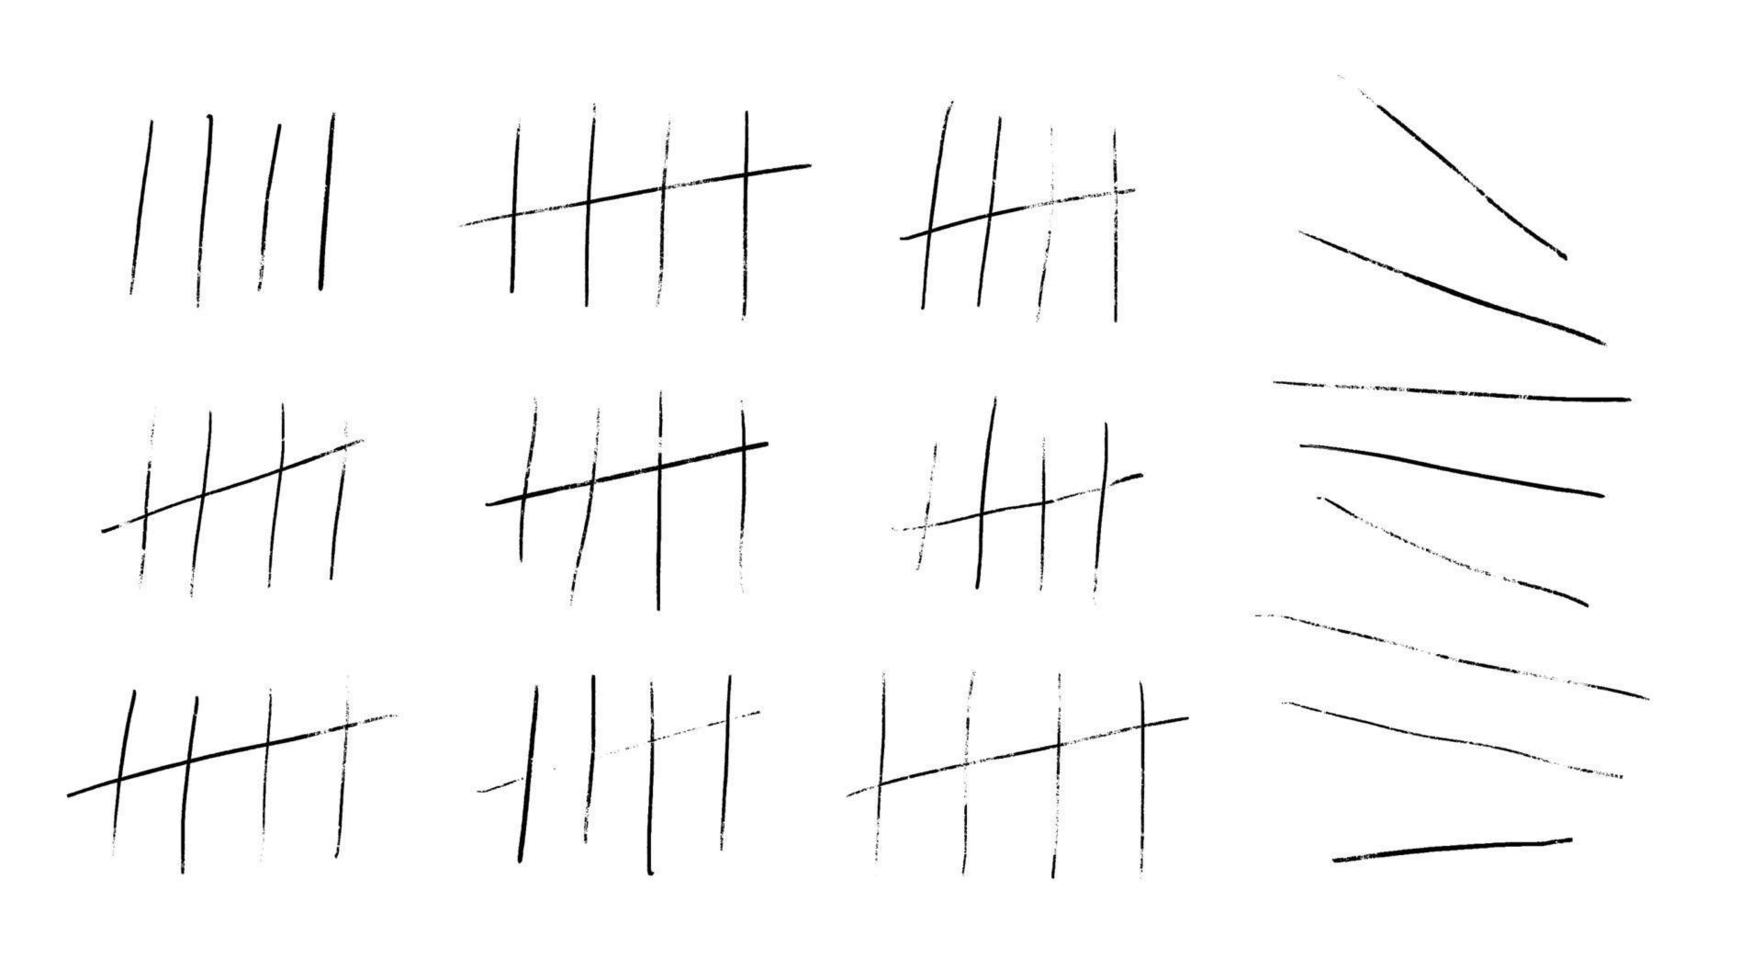 WTally marks or prison stick lines counter isolated. Vector illustration of waiting counted by scratches.